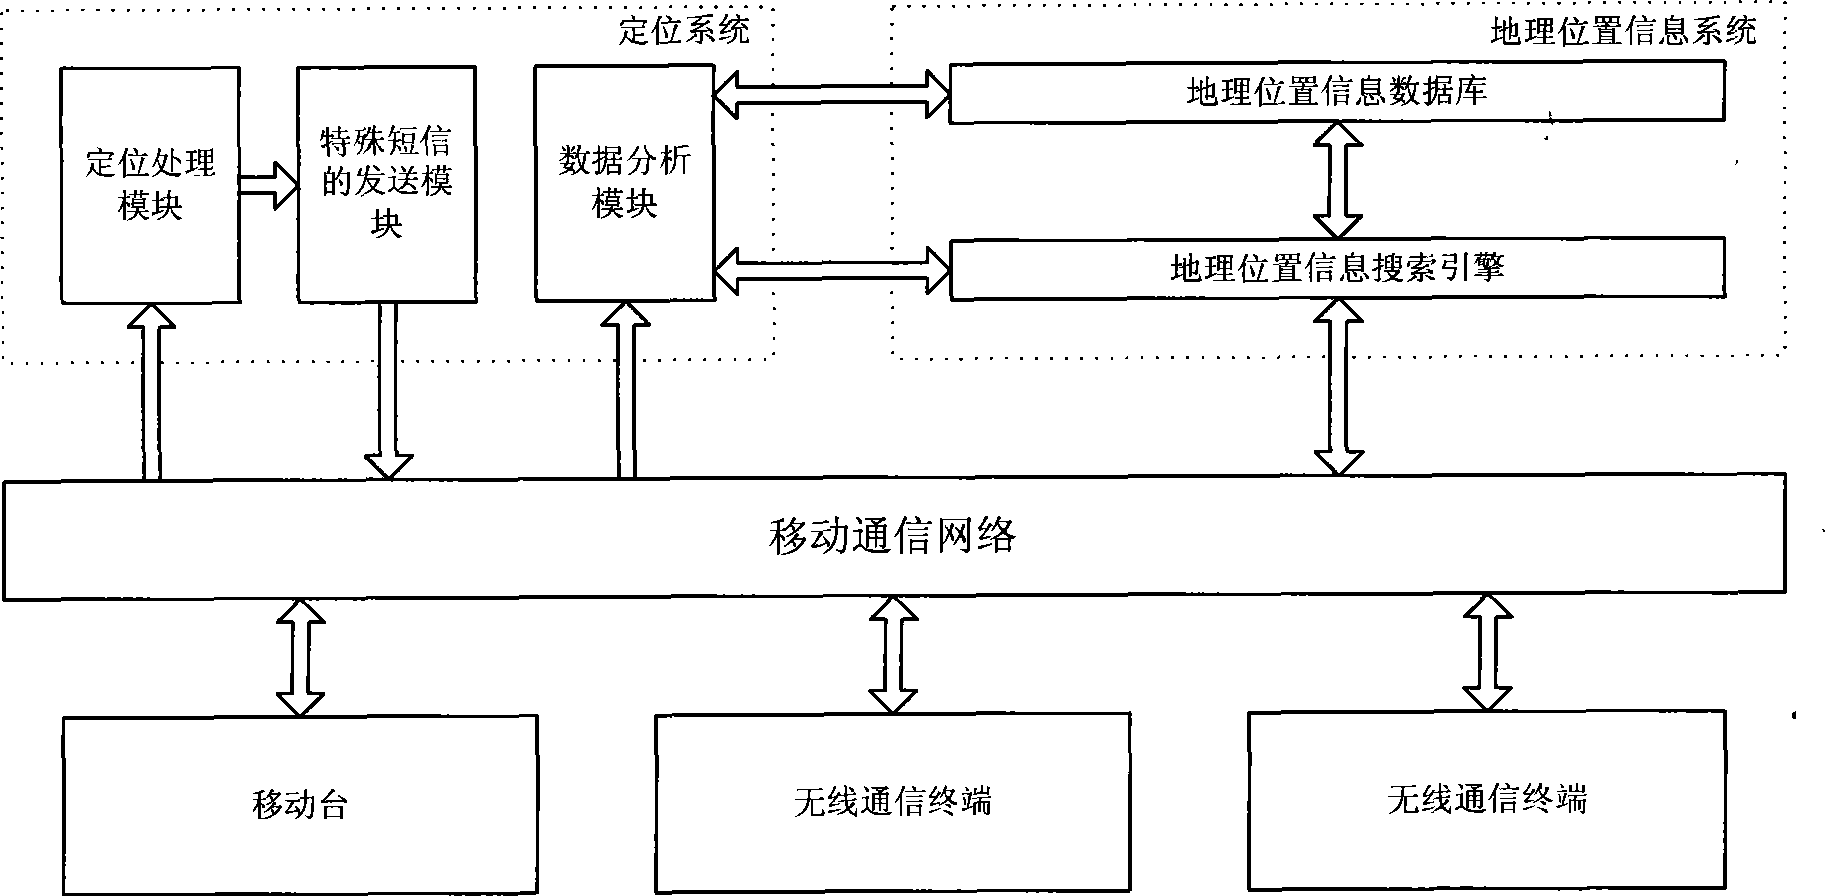 Method and system for mobile station location based on special short message, and use of the same